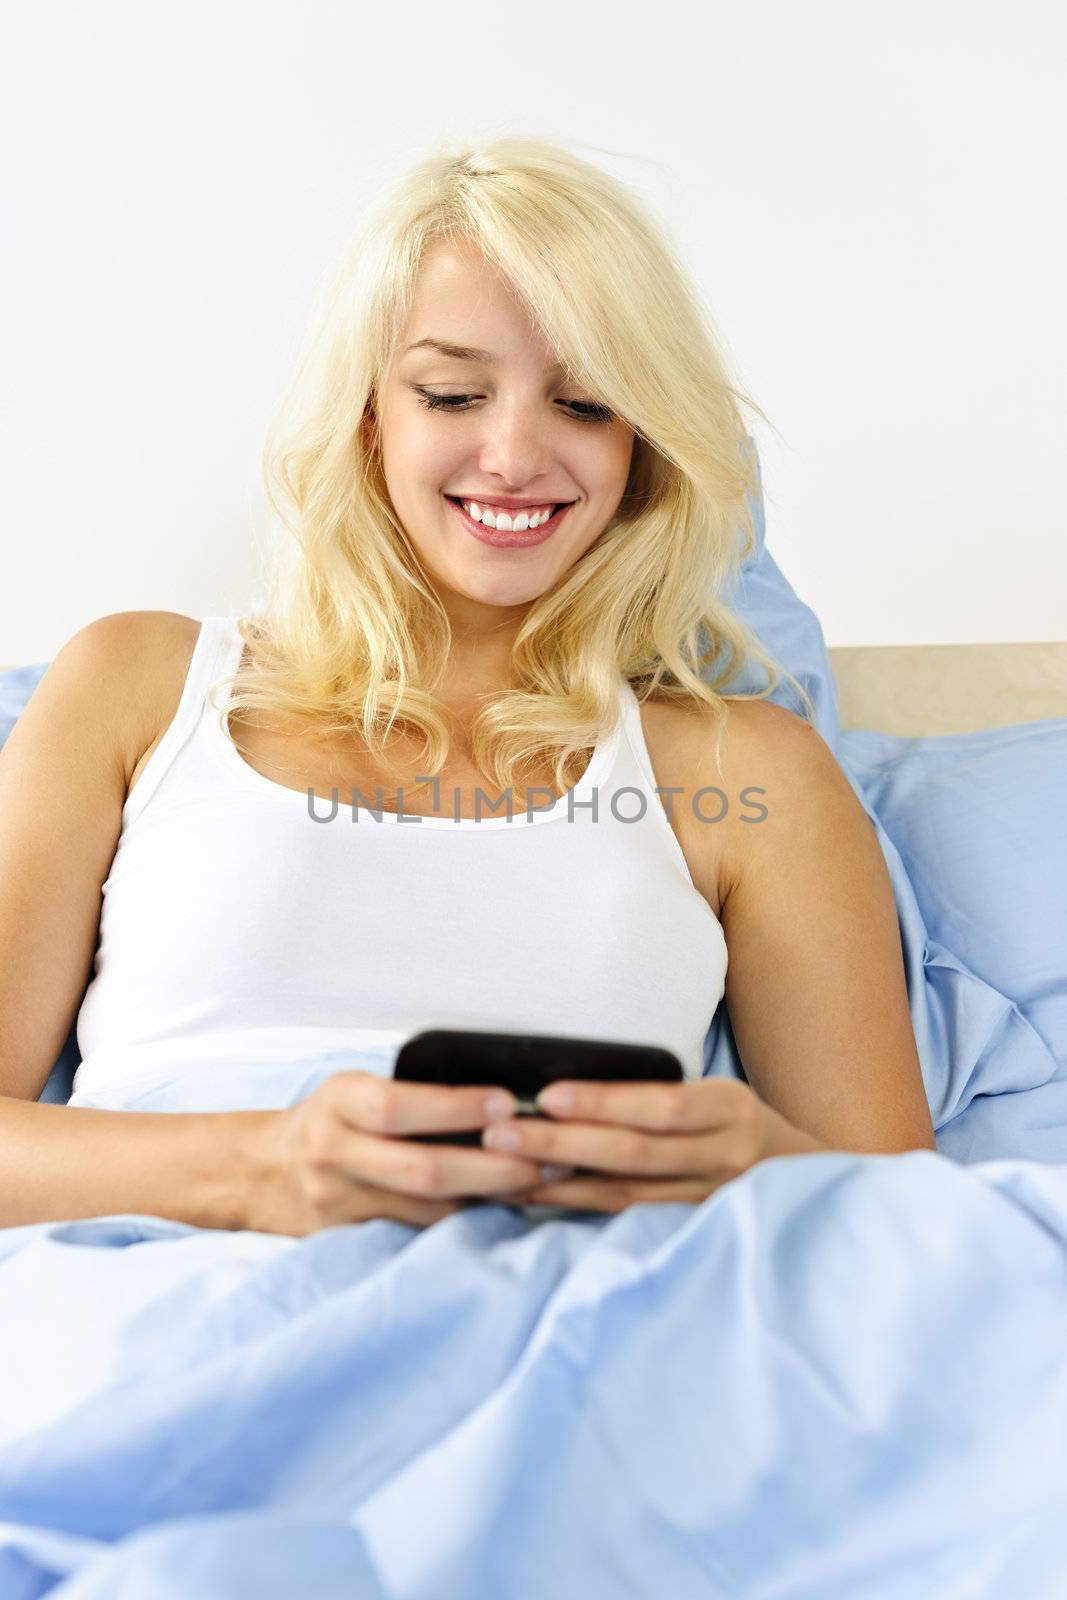 Smiling blonde woman texting on phone in bed at home